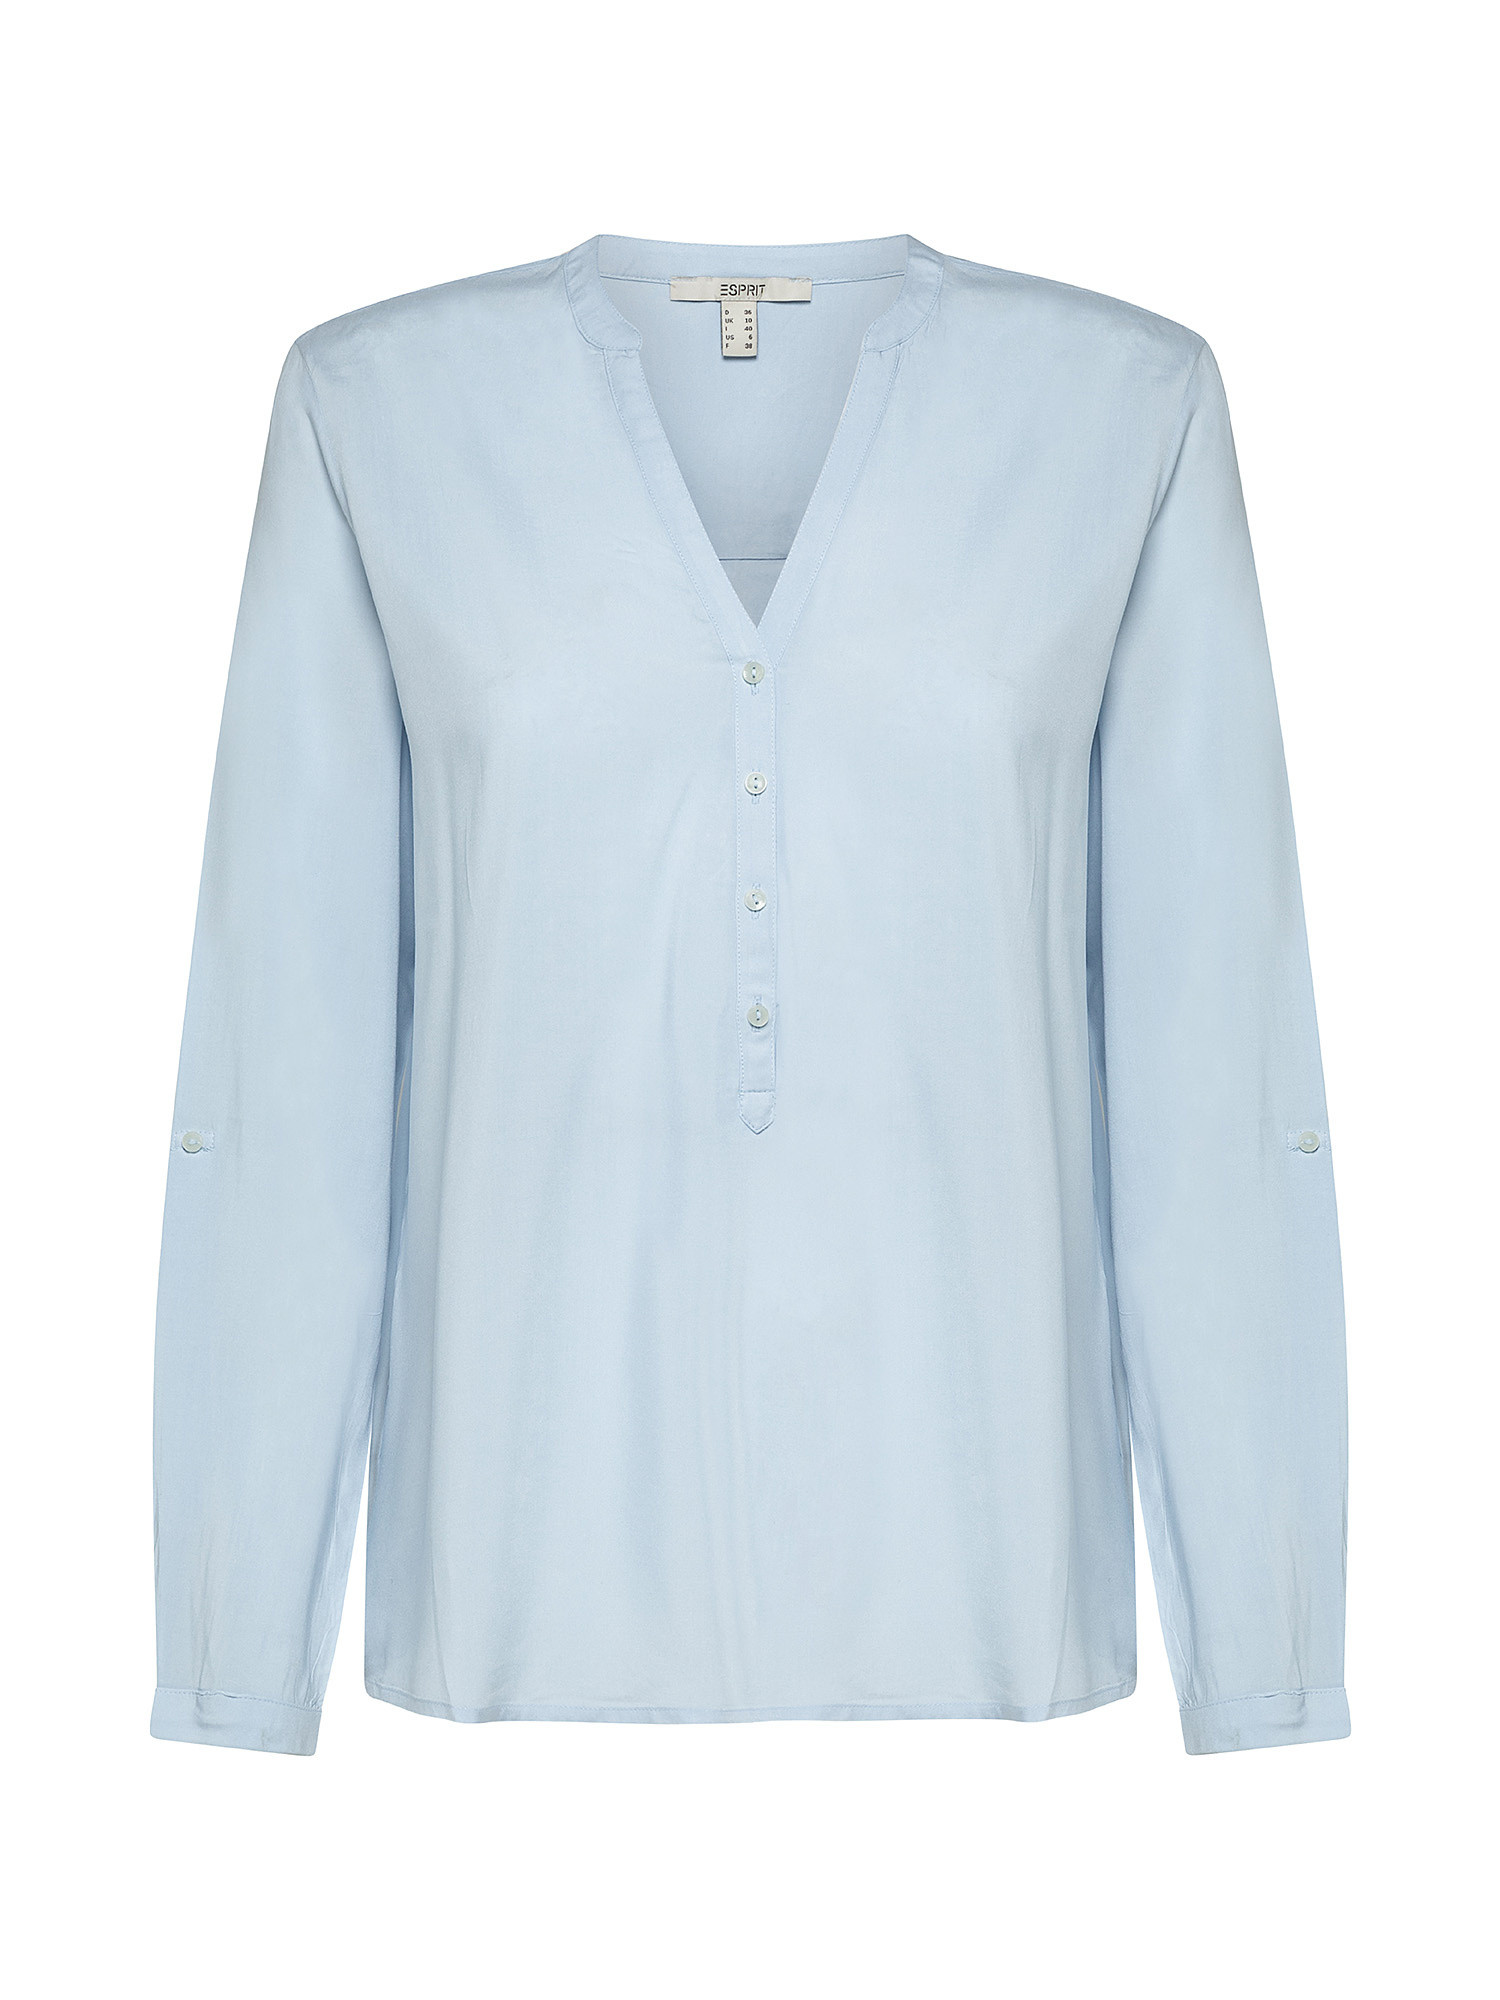 Blouse with adjustable sleeves, Light Blue, large image number 0